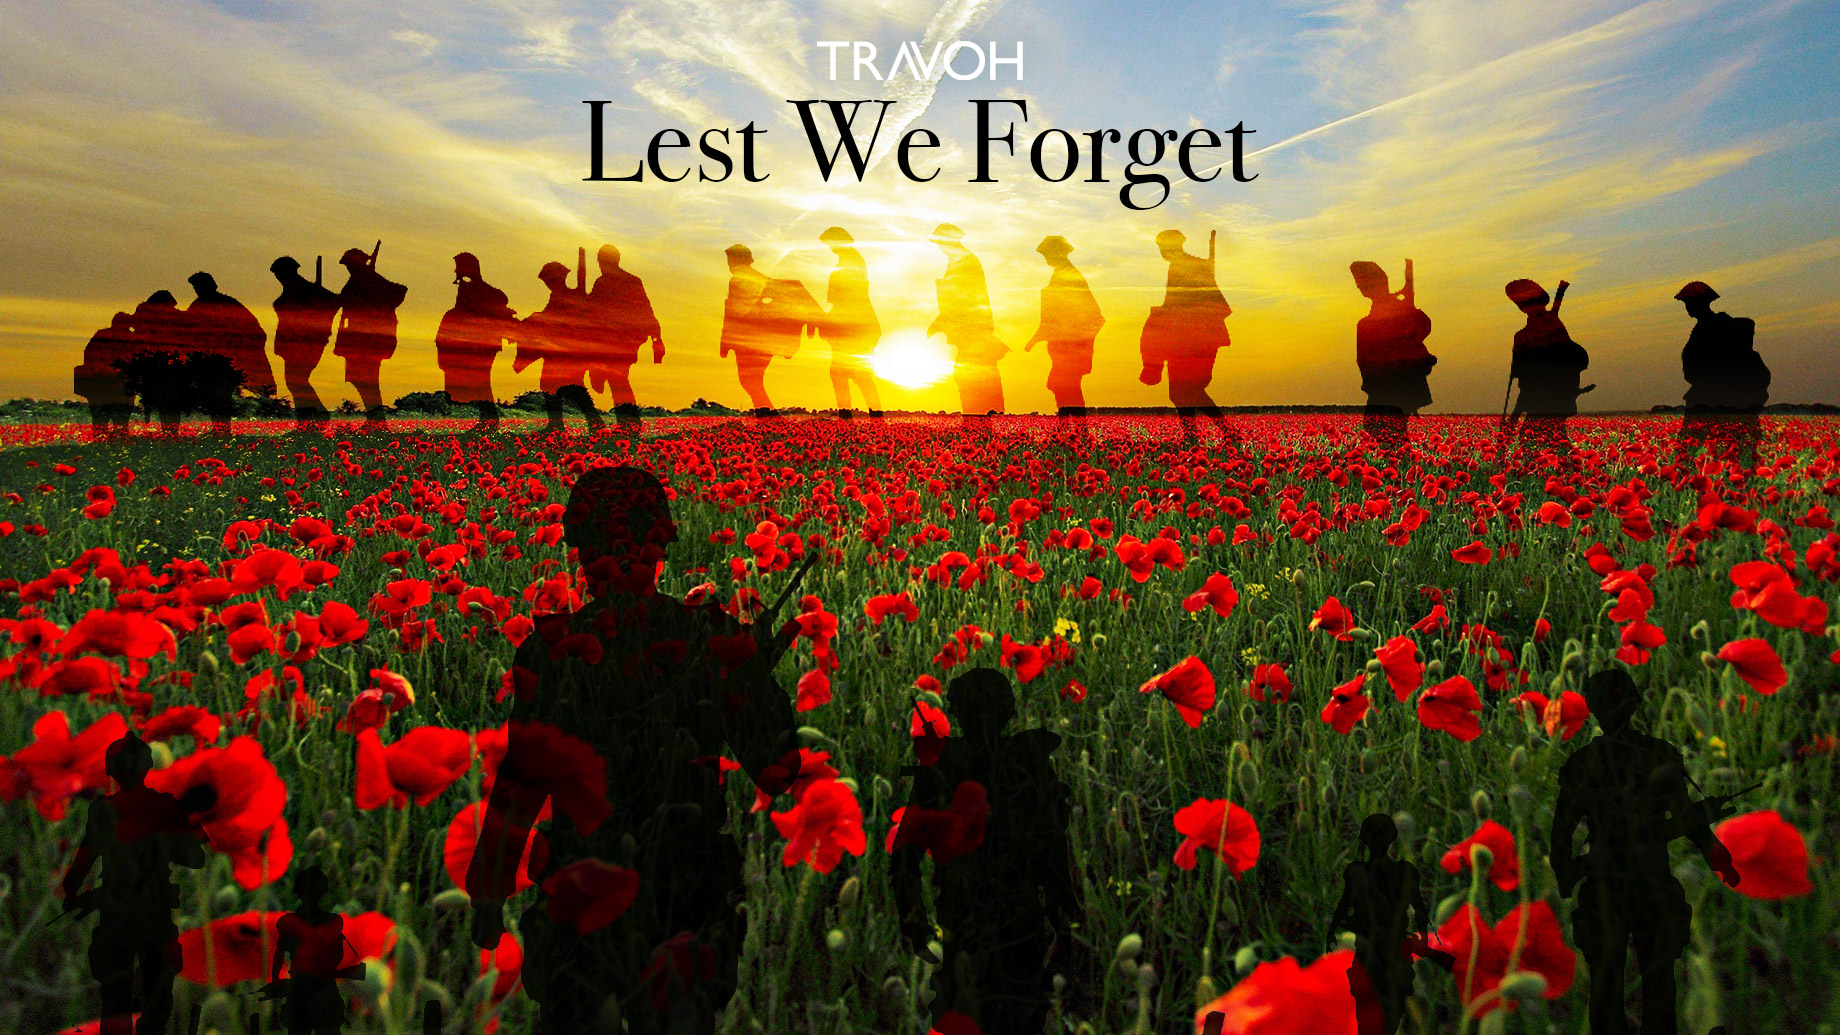 Lest We Forget – Remembering World War Veterans Who Sacrificed For Freedom